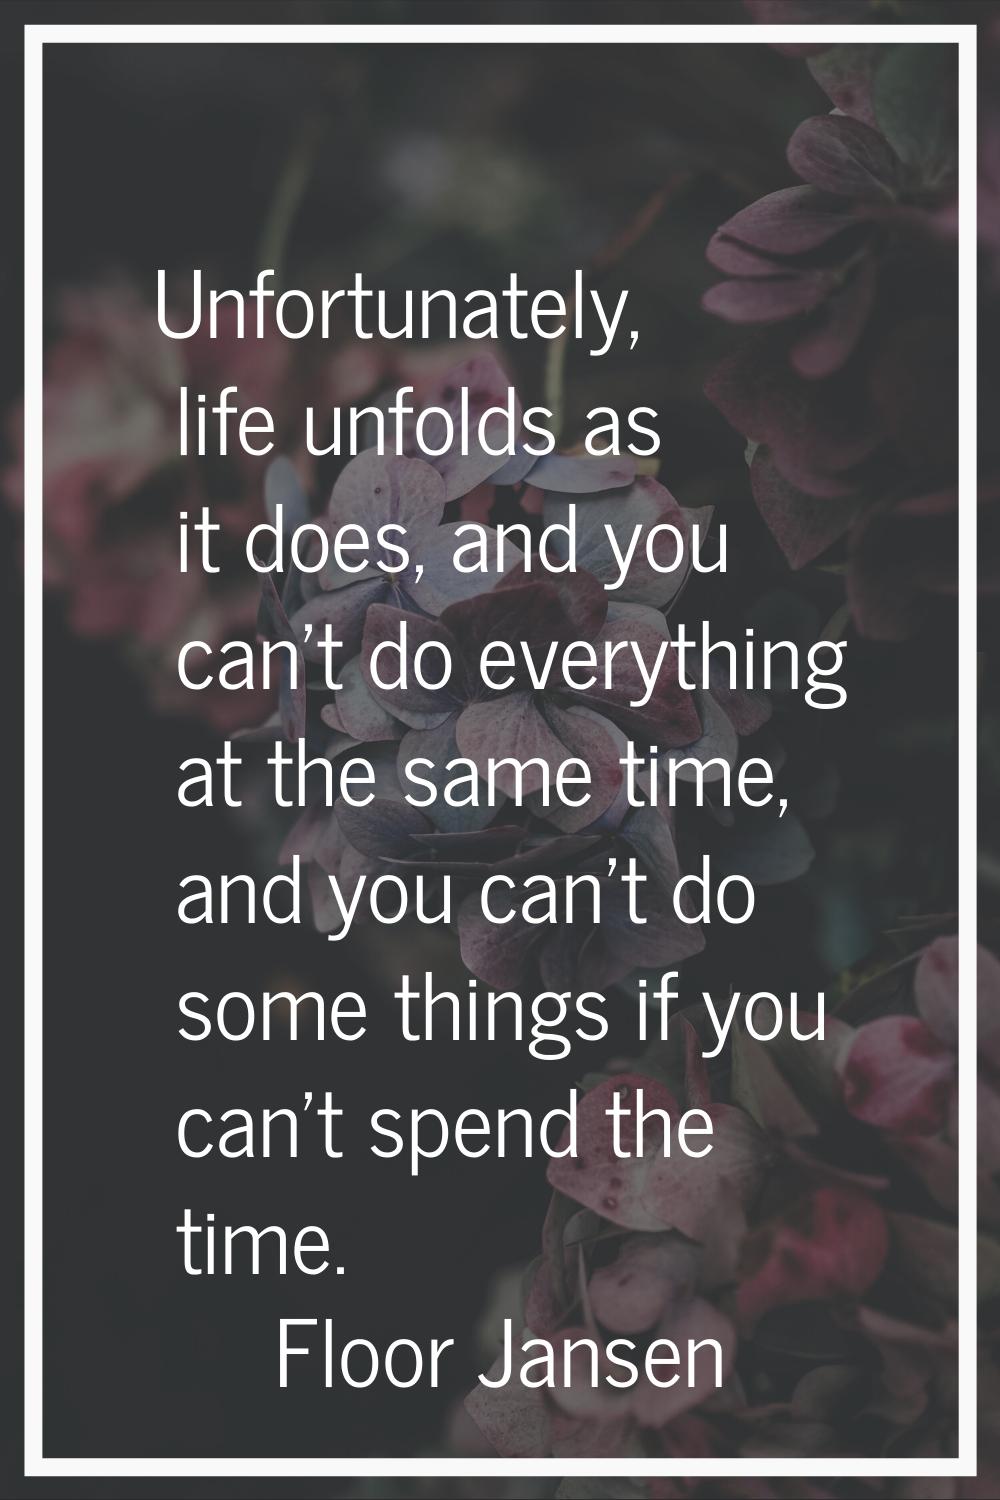 Unfortunately, life unfolds as it does, and you can't do everything at the same time, and you can't